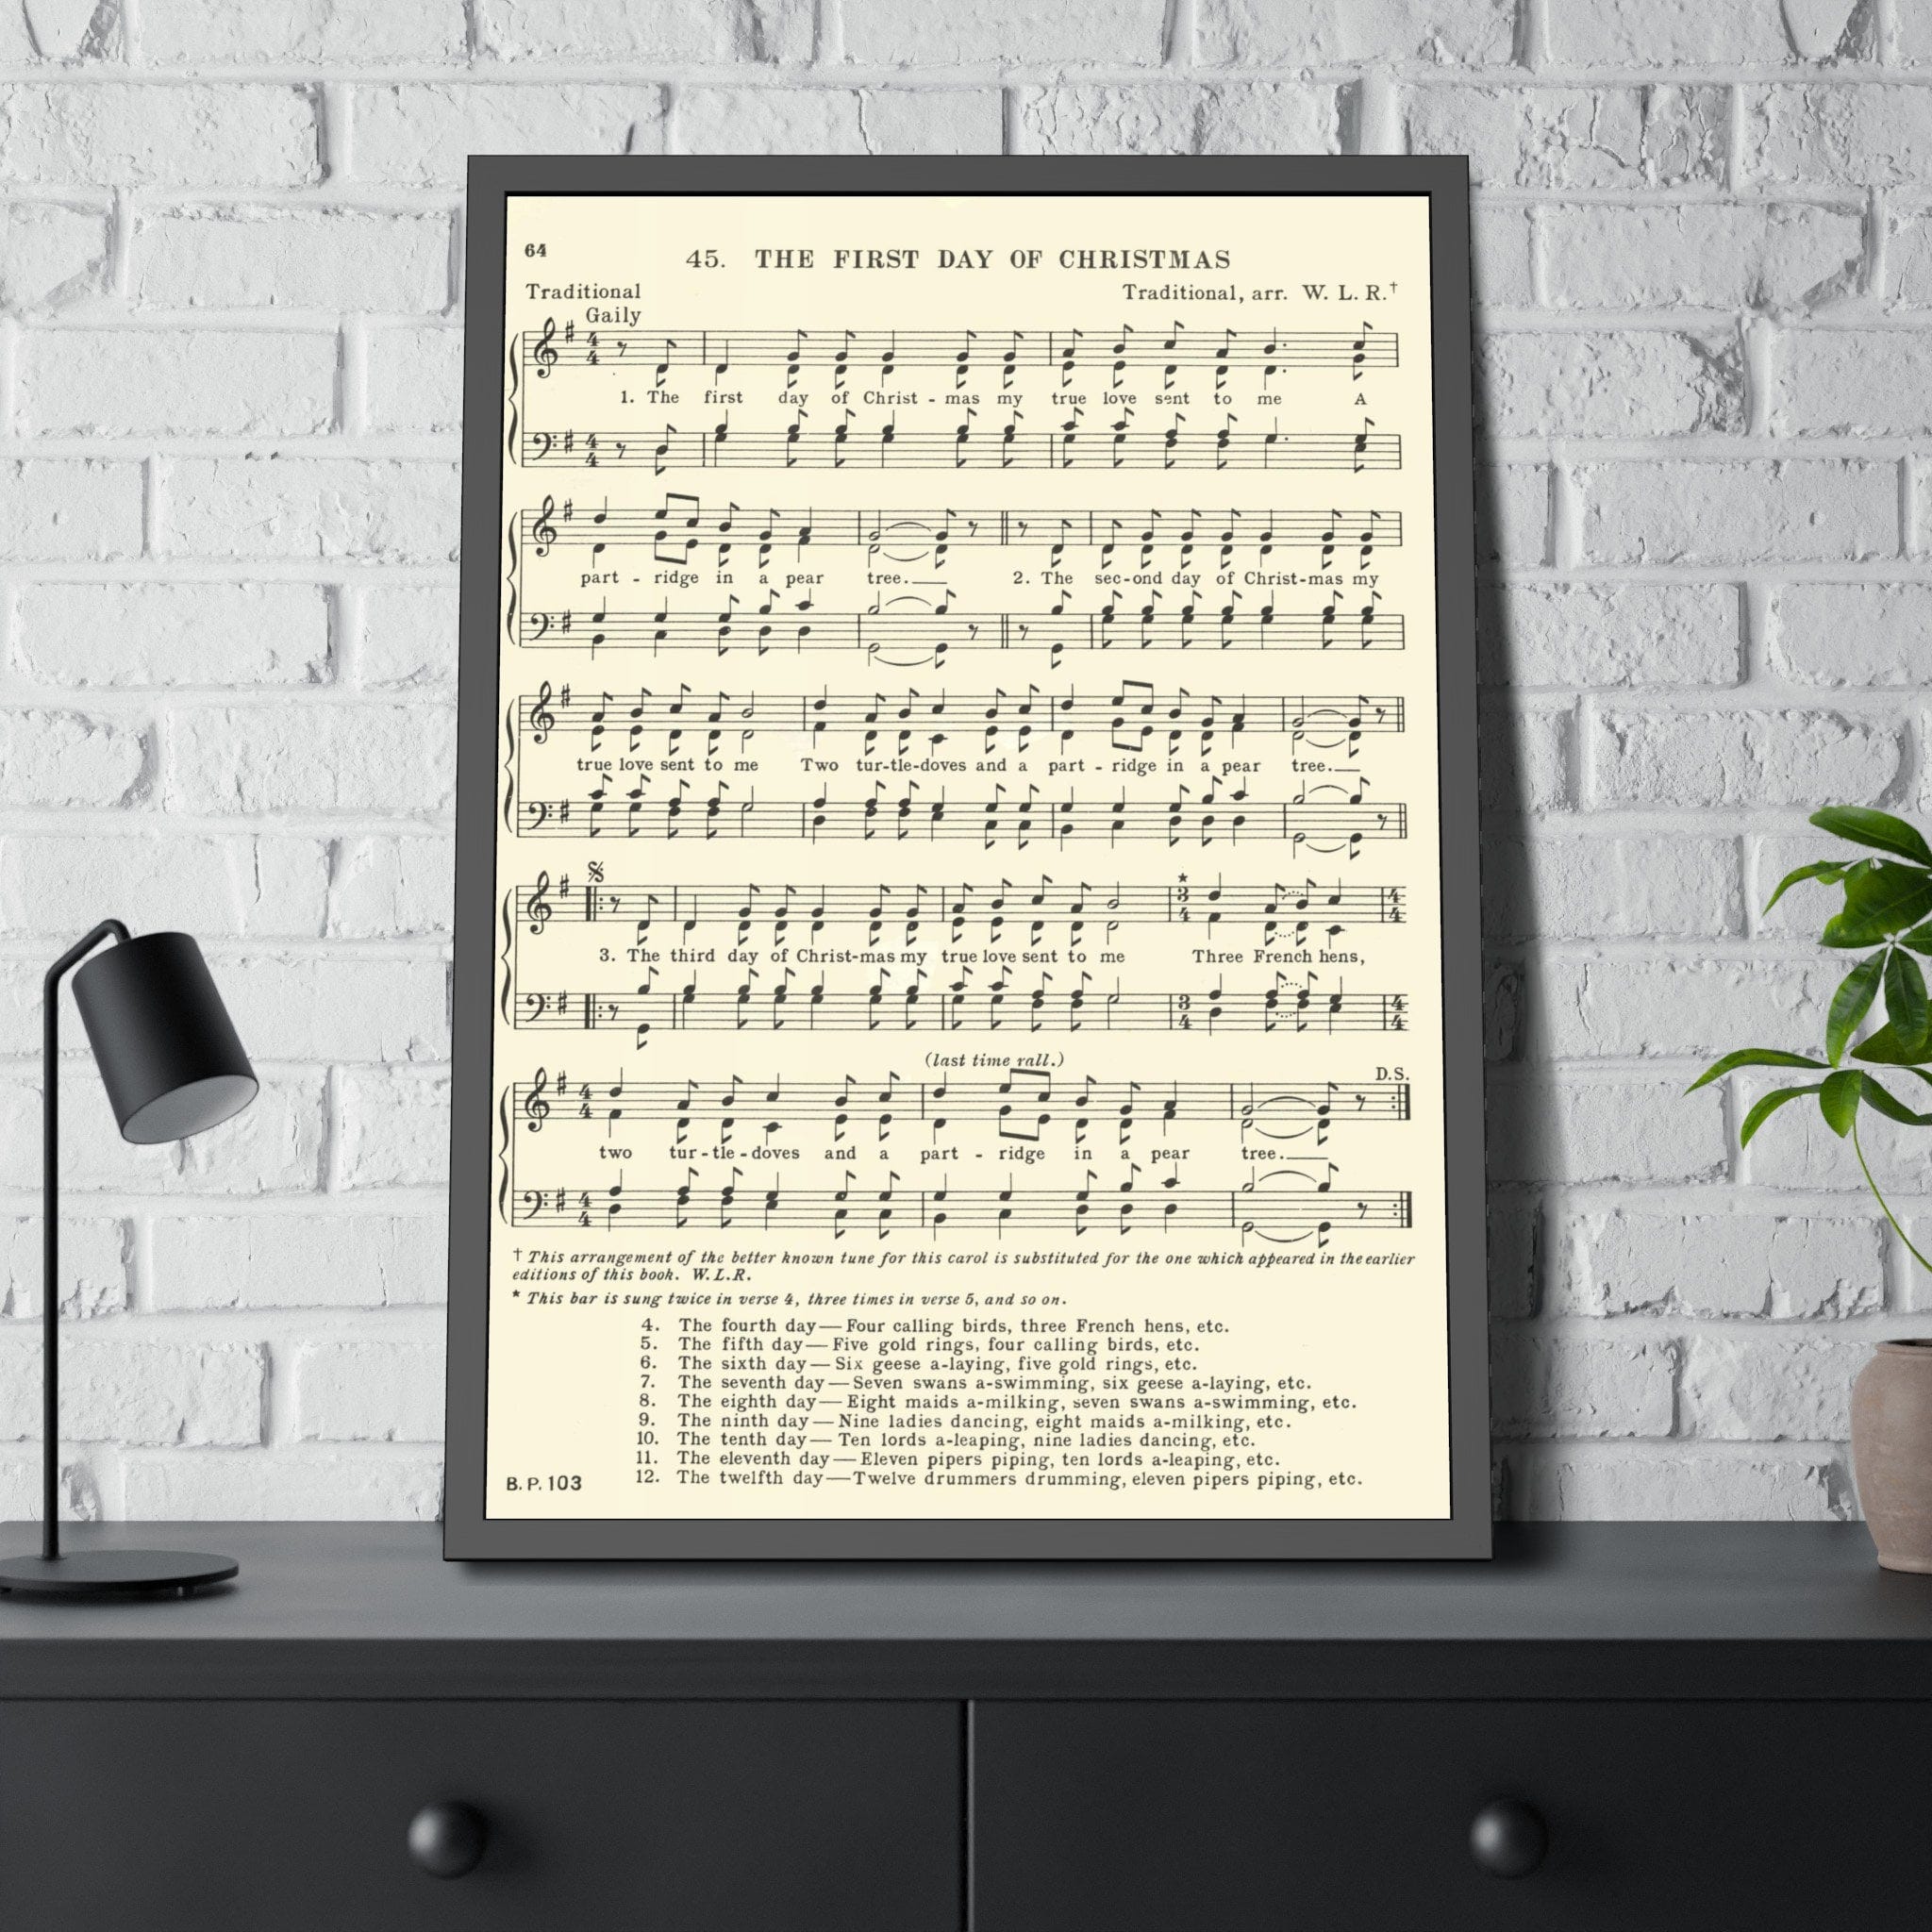 The First Day of Christmas |Printable Vintage Hymn | Sheet Music | Instant Download | Antique Hymn | 12 days of Christmas